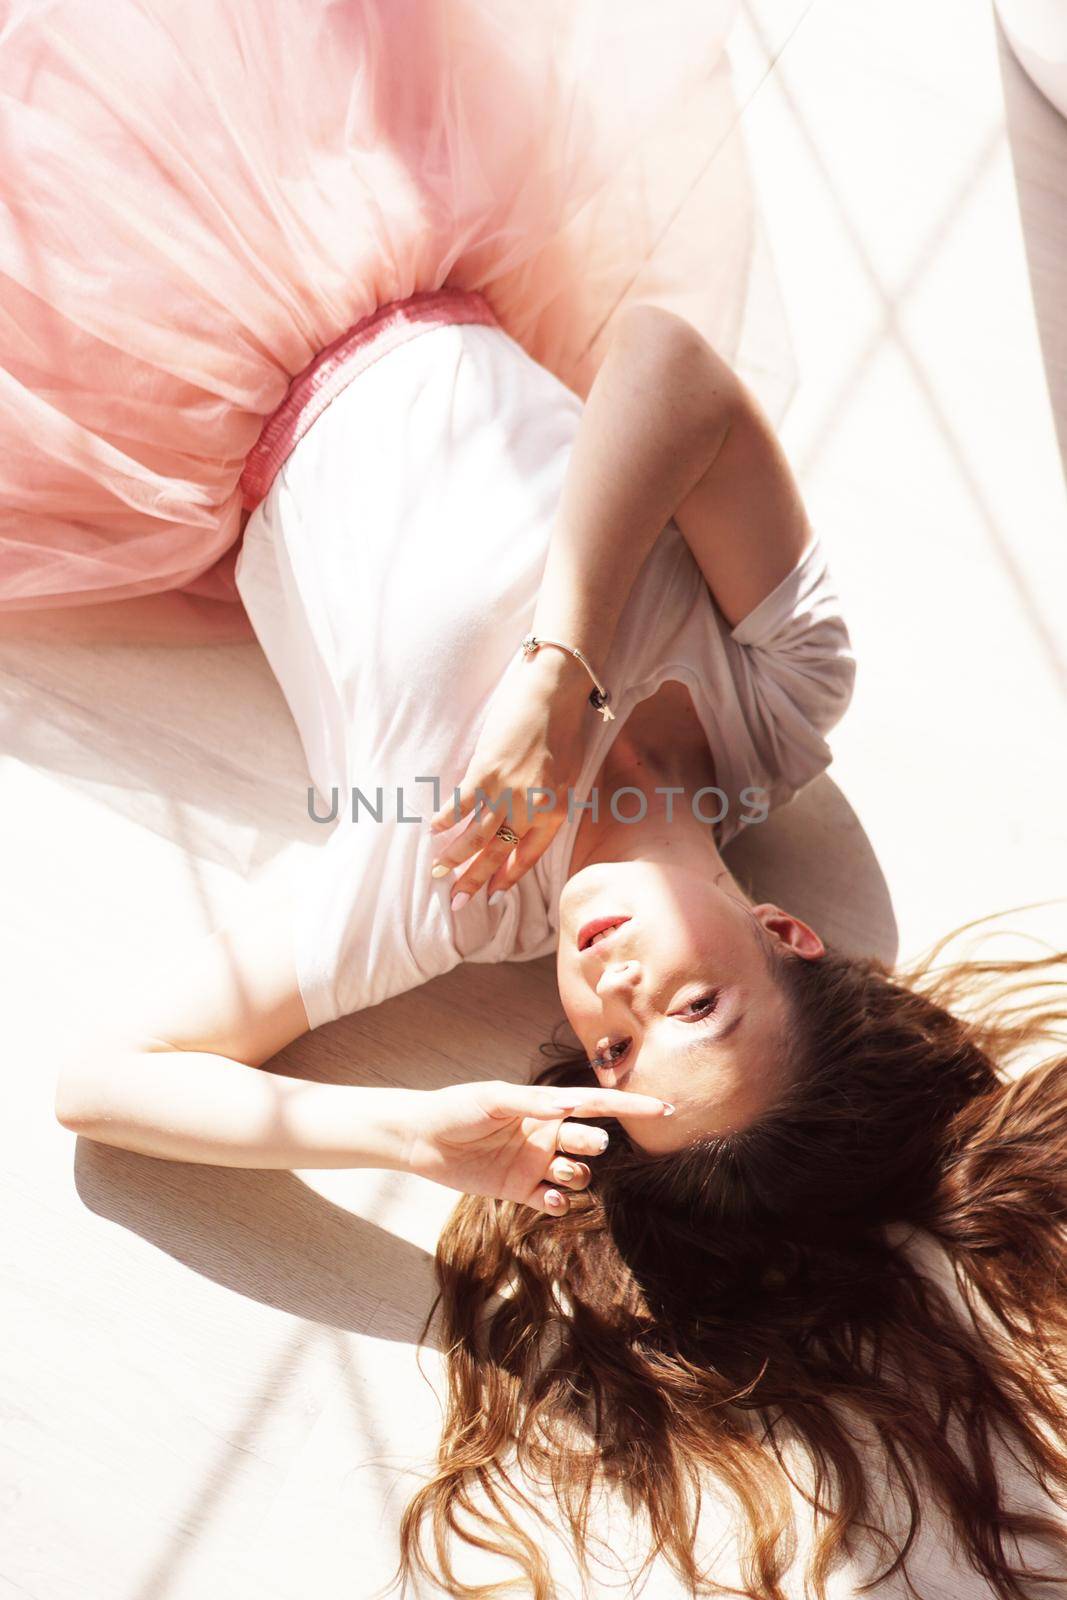 A portrait of a young woman in beautiful sunlight from window. She lies on a wooden floor.